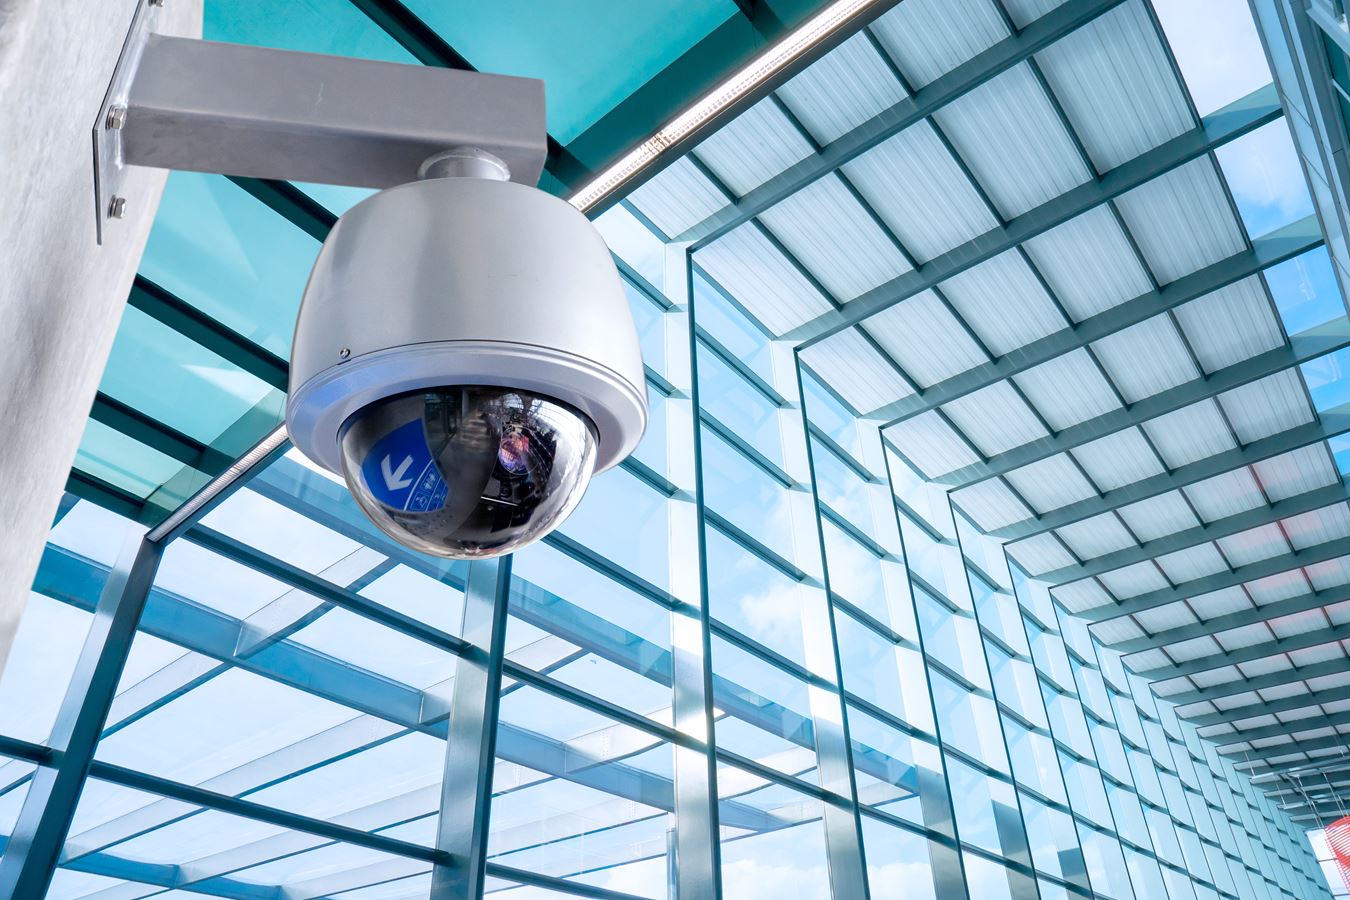 A new approach to building security systems